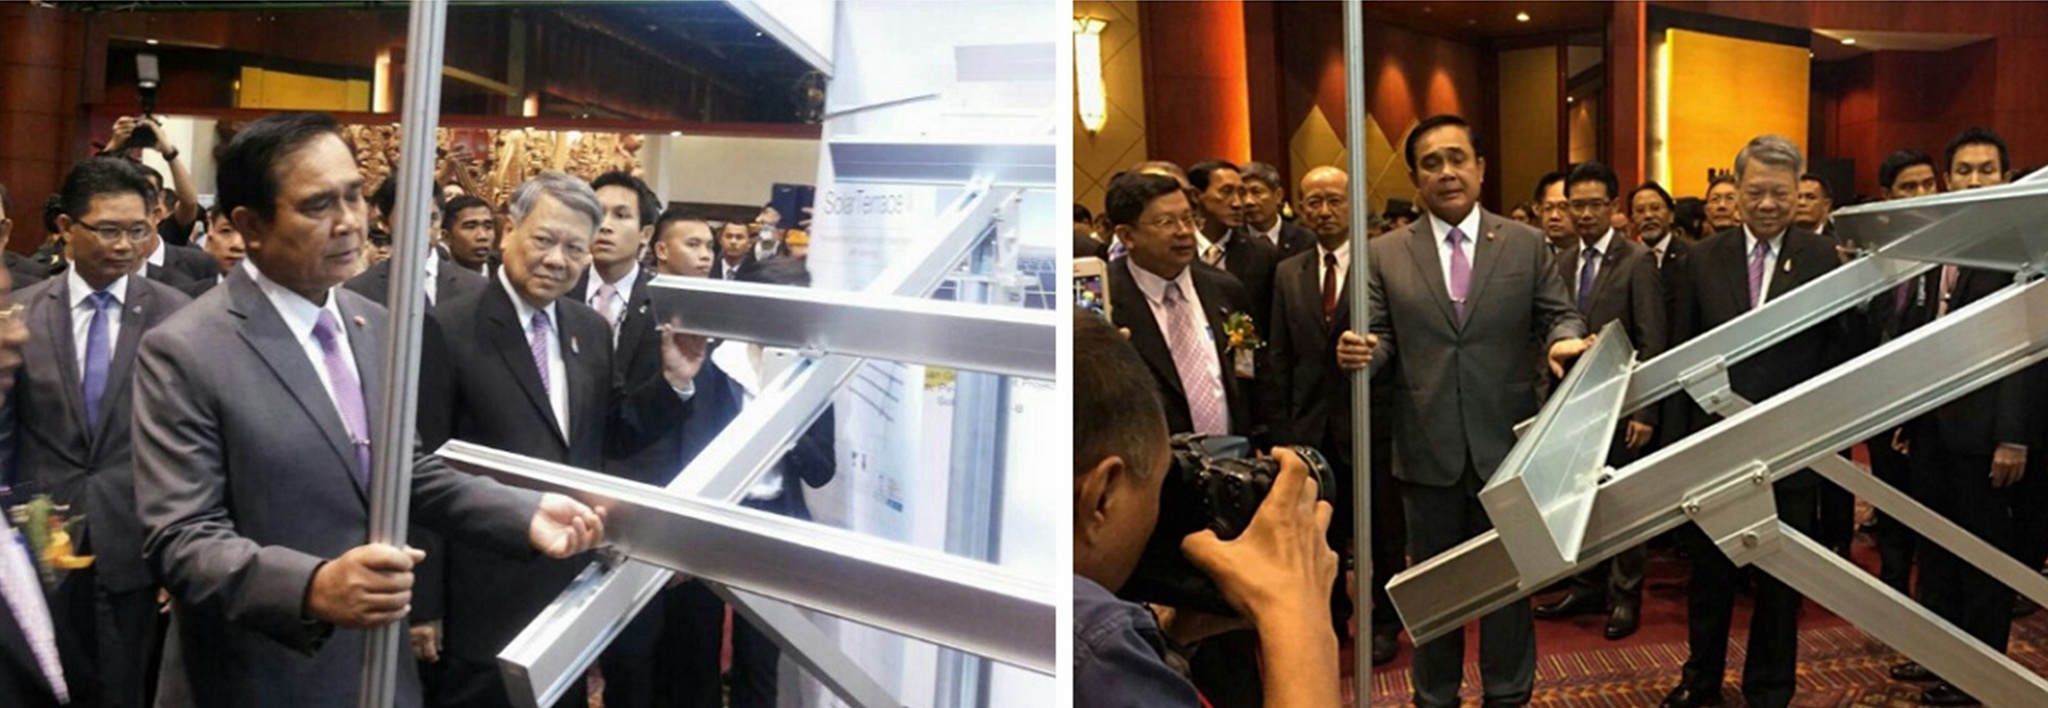 Thai PM Visits Clenergy Booth at Green Network Forum in Bangkok